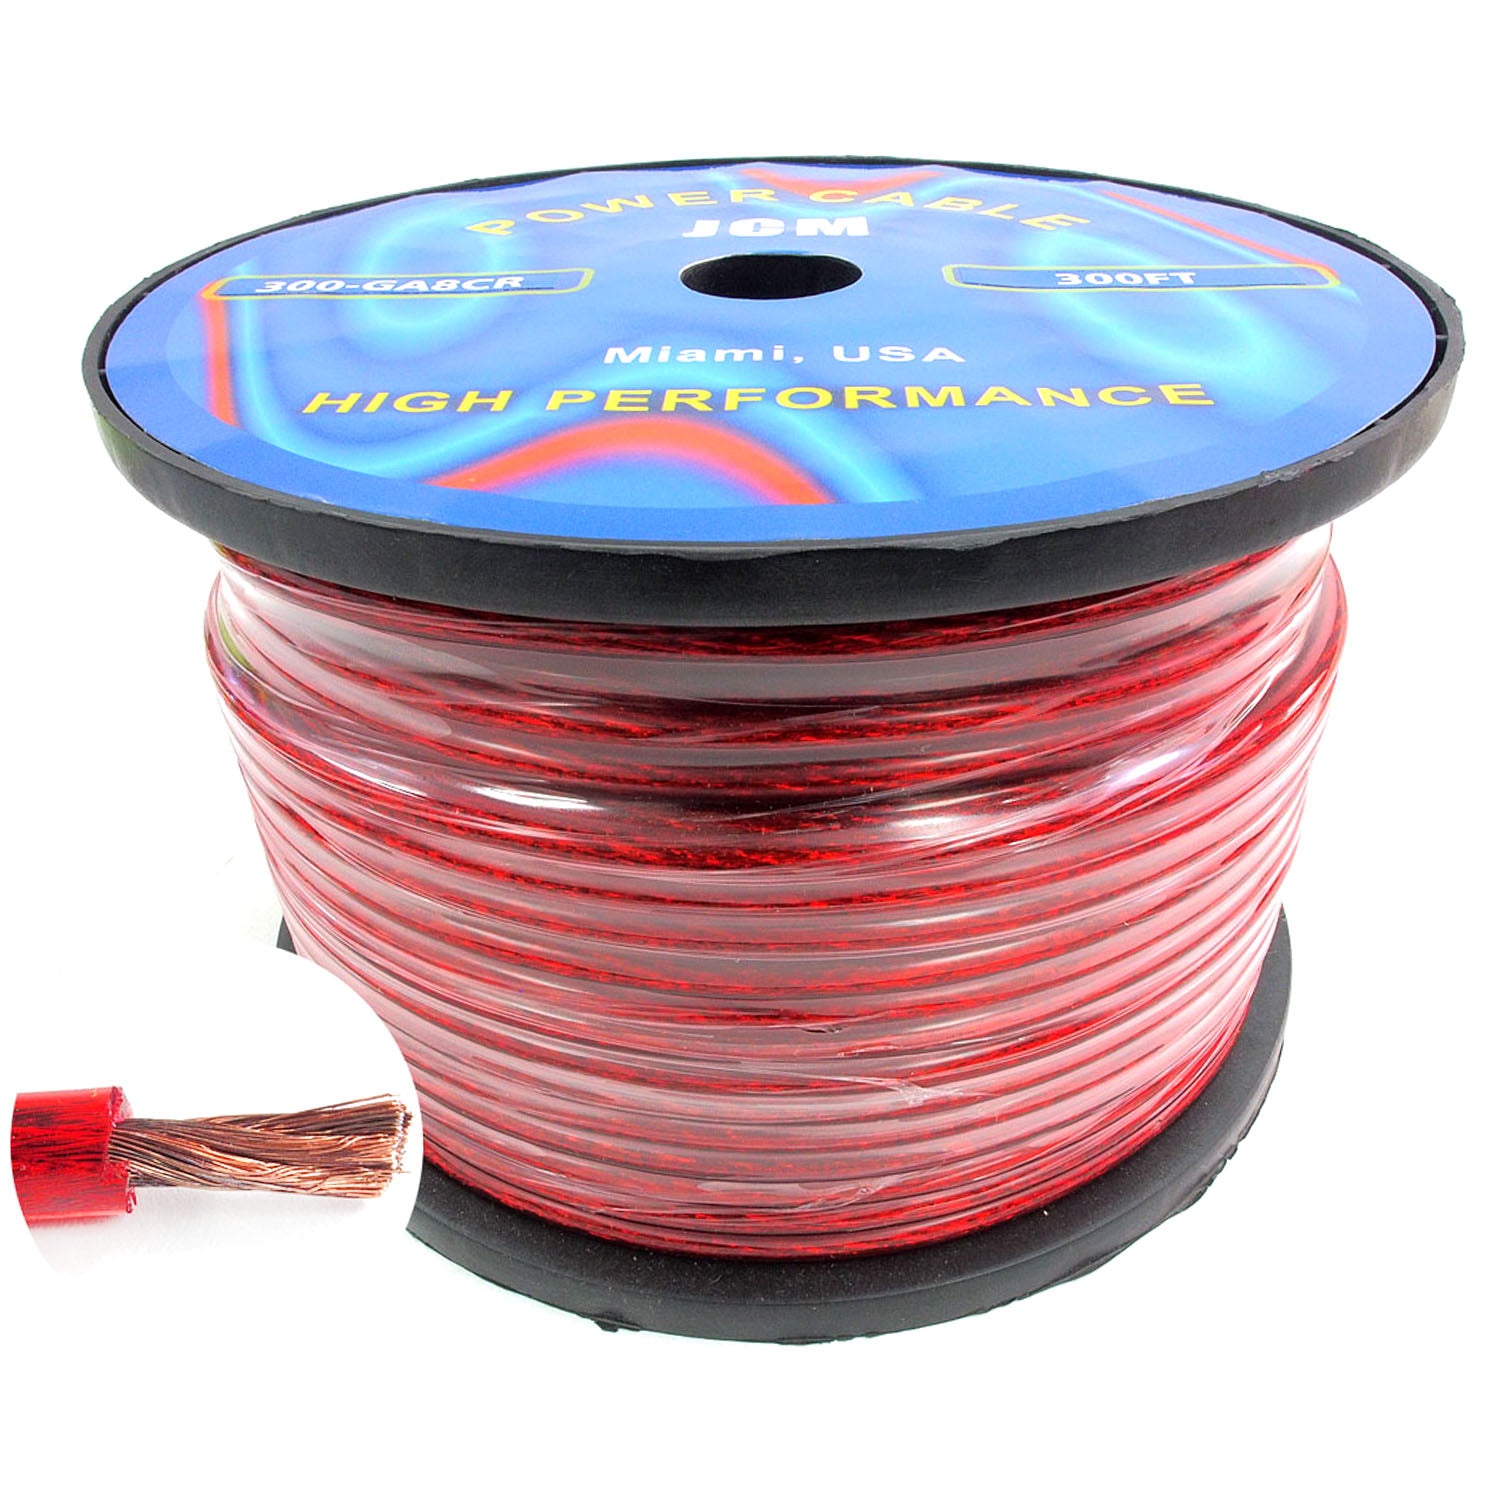 300-GA8/CR300FT 300FT 8GA Clear/Red Wire